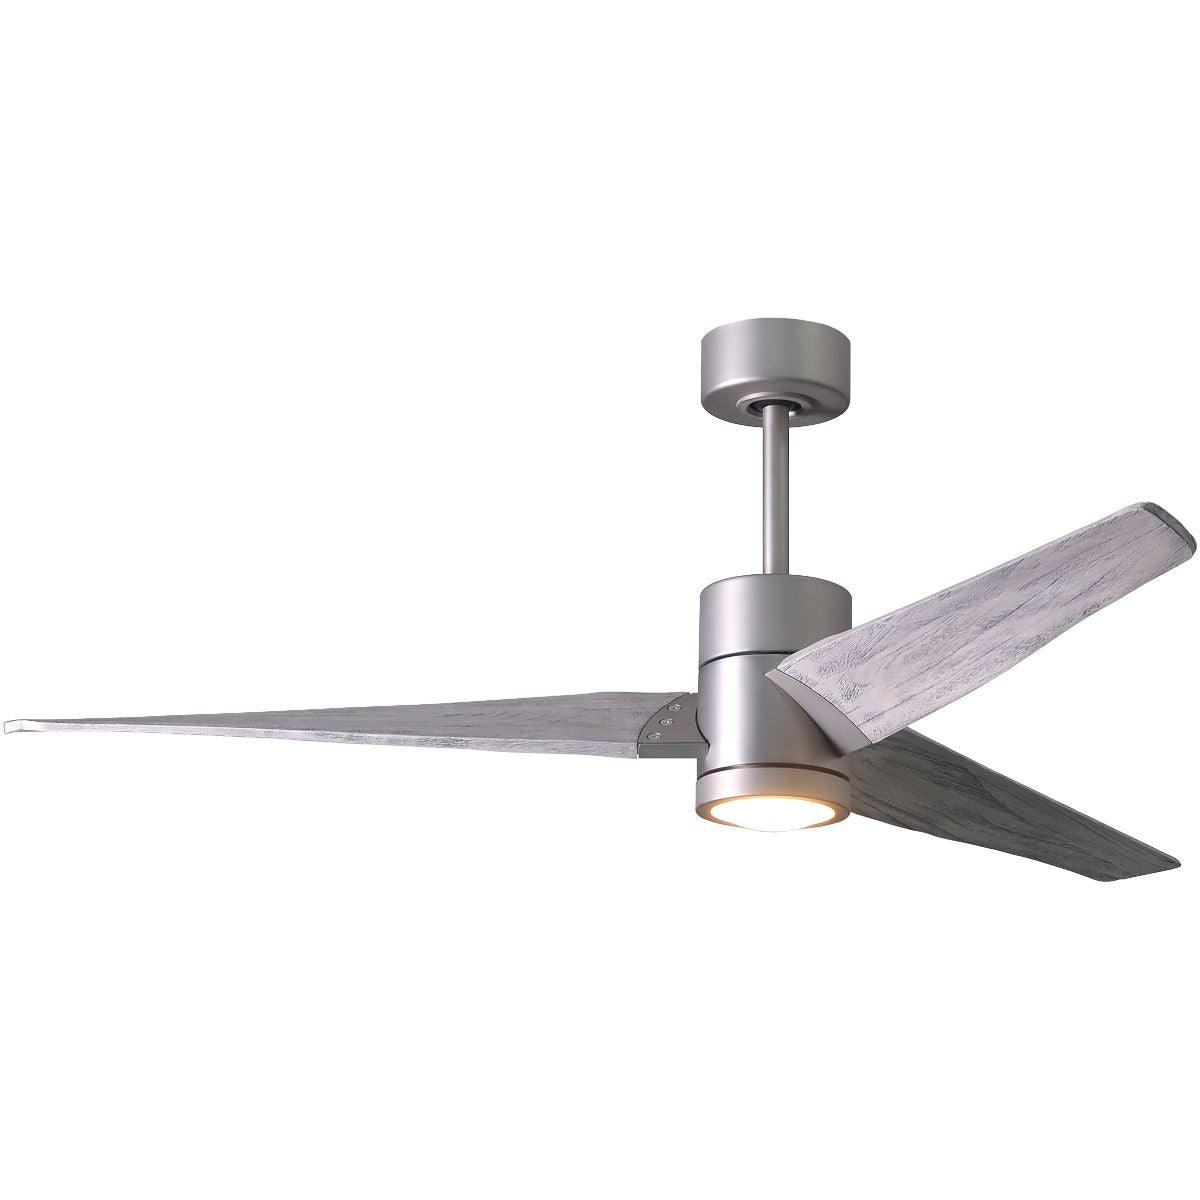 Super Janet 60 Inch Outdoor Ceiling Fan With Light, Wall And Remote Control Included - Bees Lighting